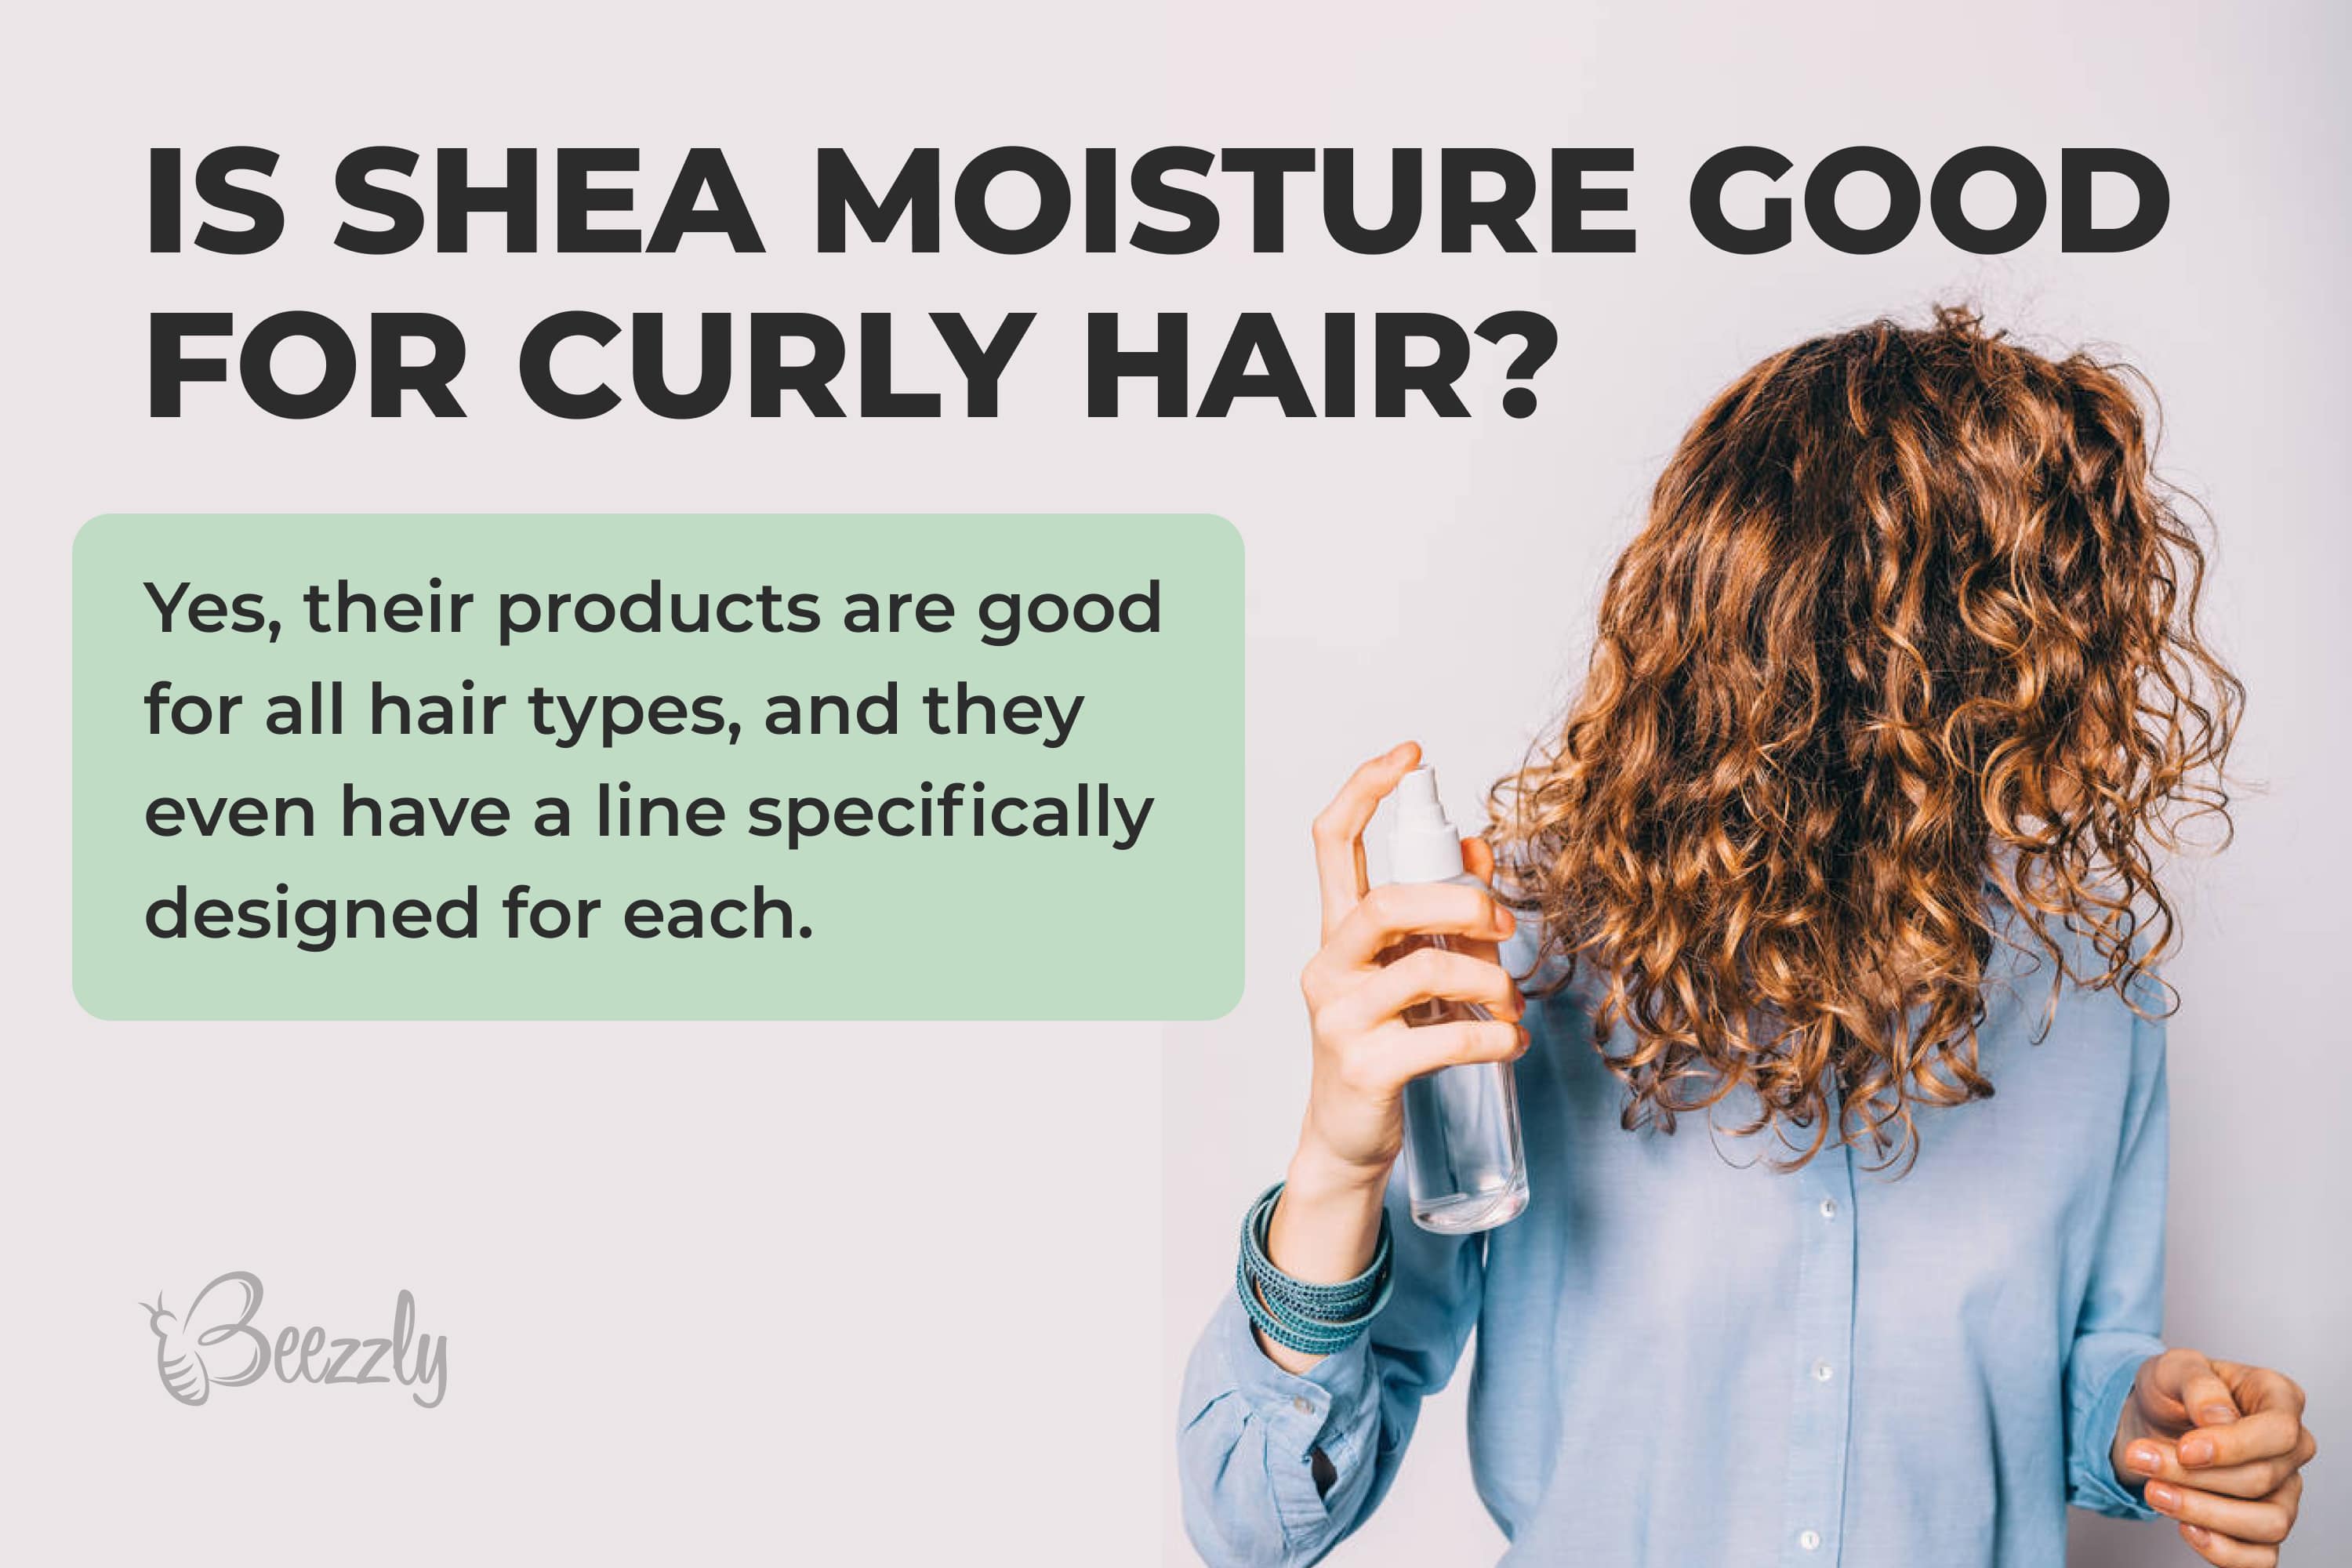 Is shea moisture good for curly hair